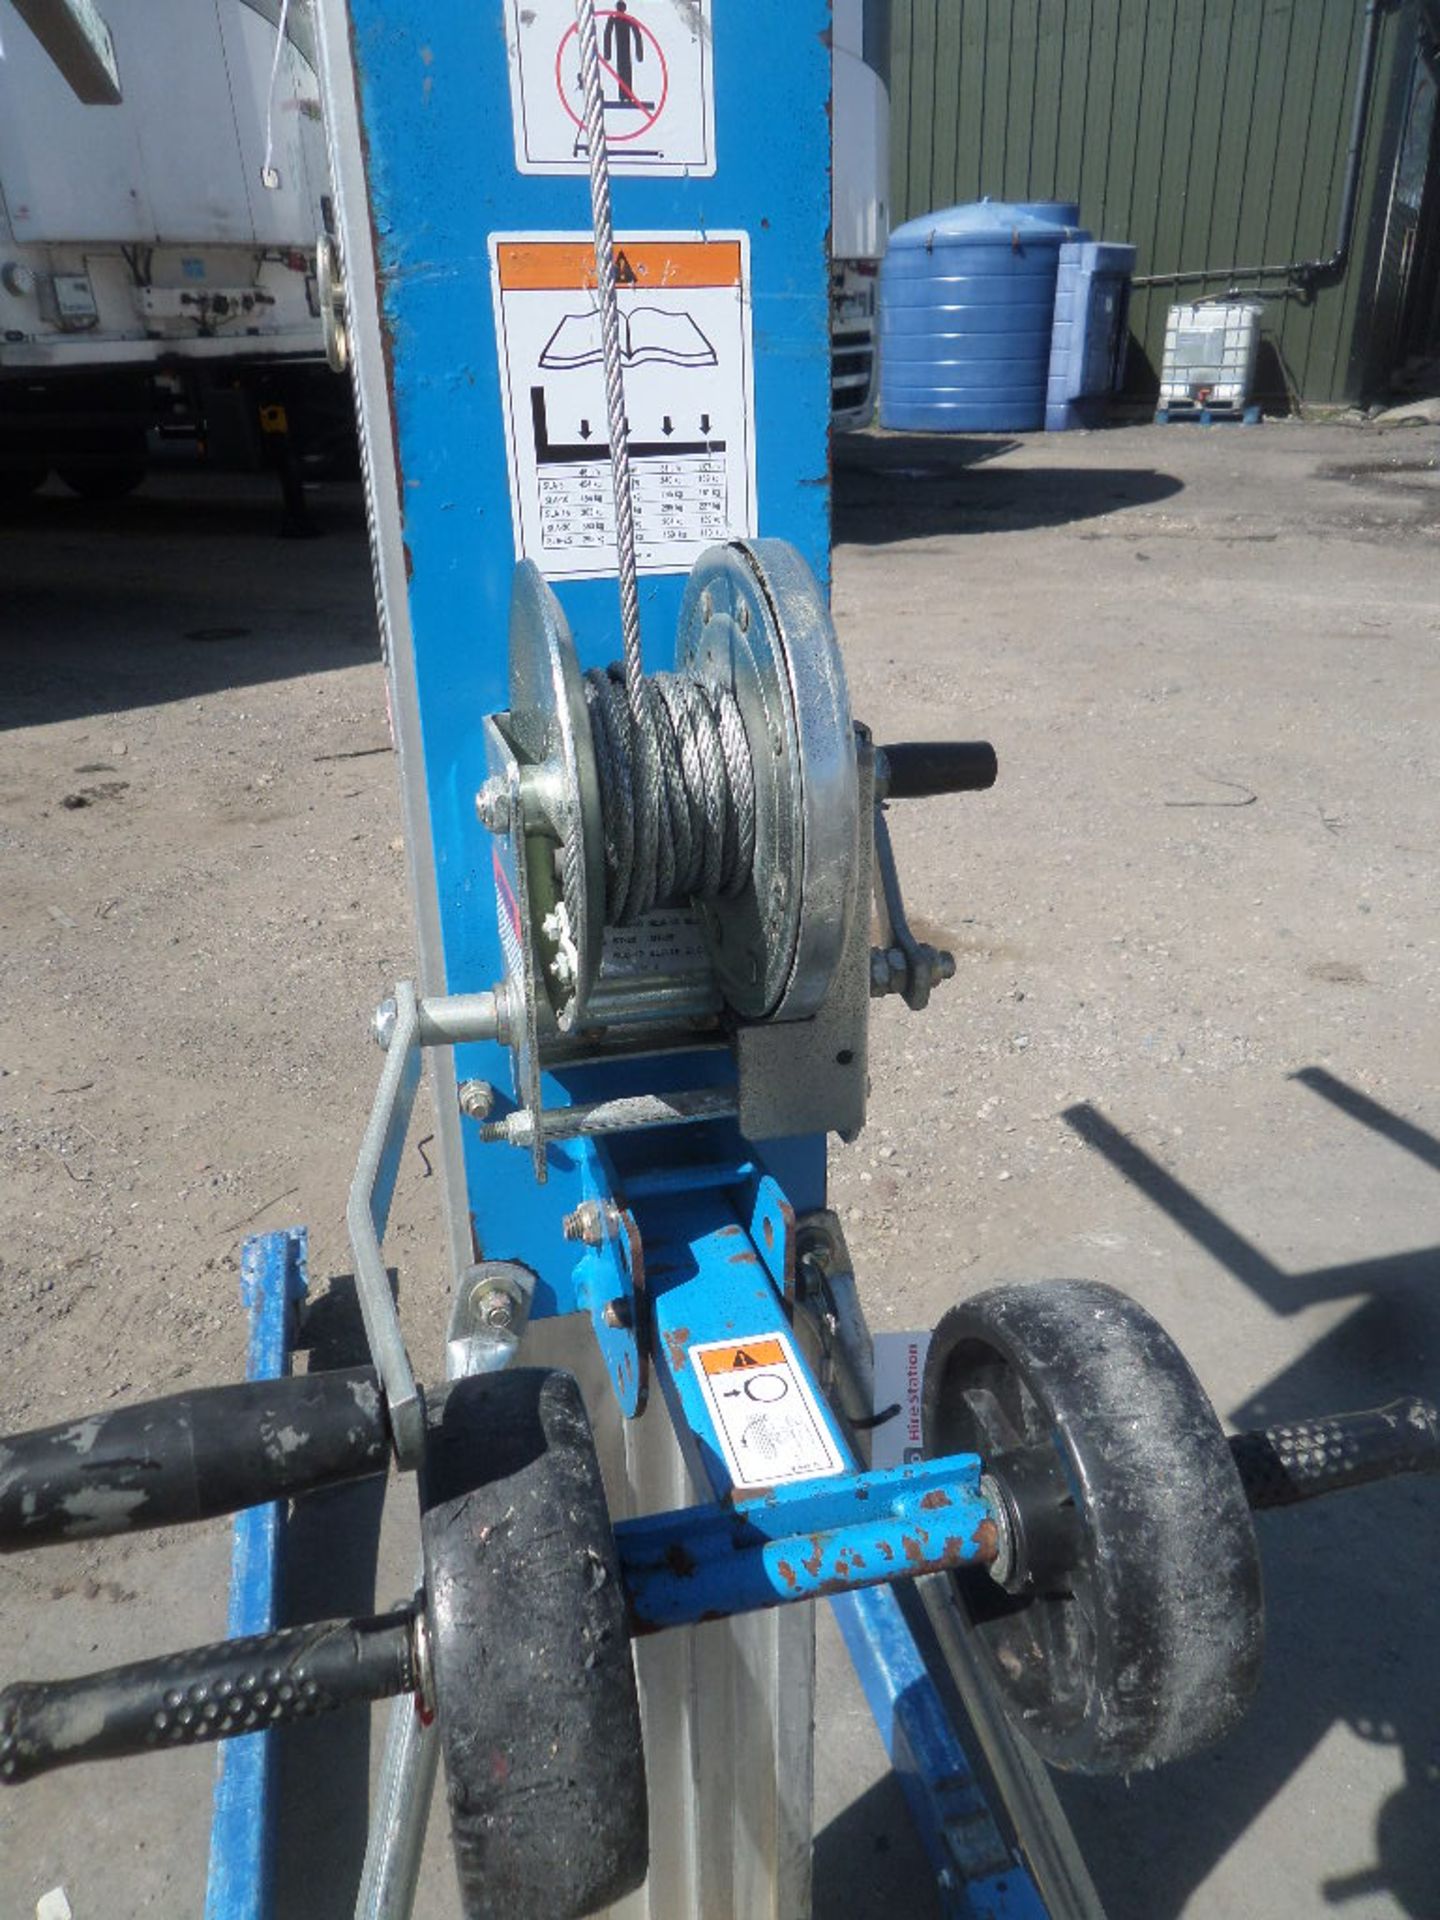 GENIE SUPERLIFT ADVANTAGE SLA 15 {027268} 363KG LIFTER/STACKER MANUAL Max load it can carry is 363kg - Image 3 of 4